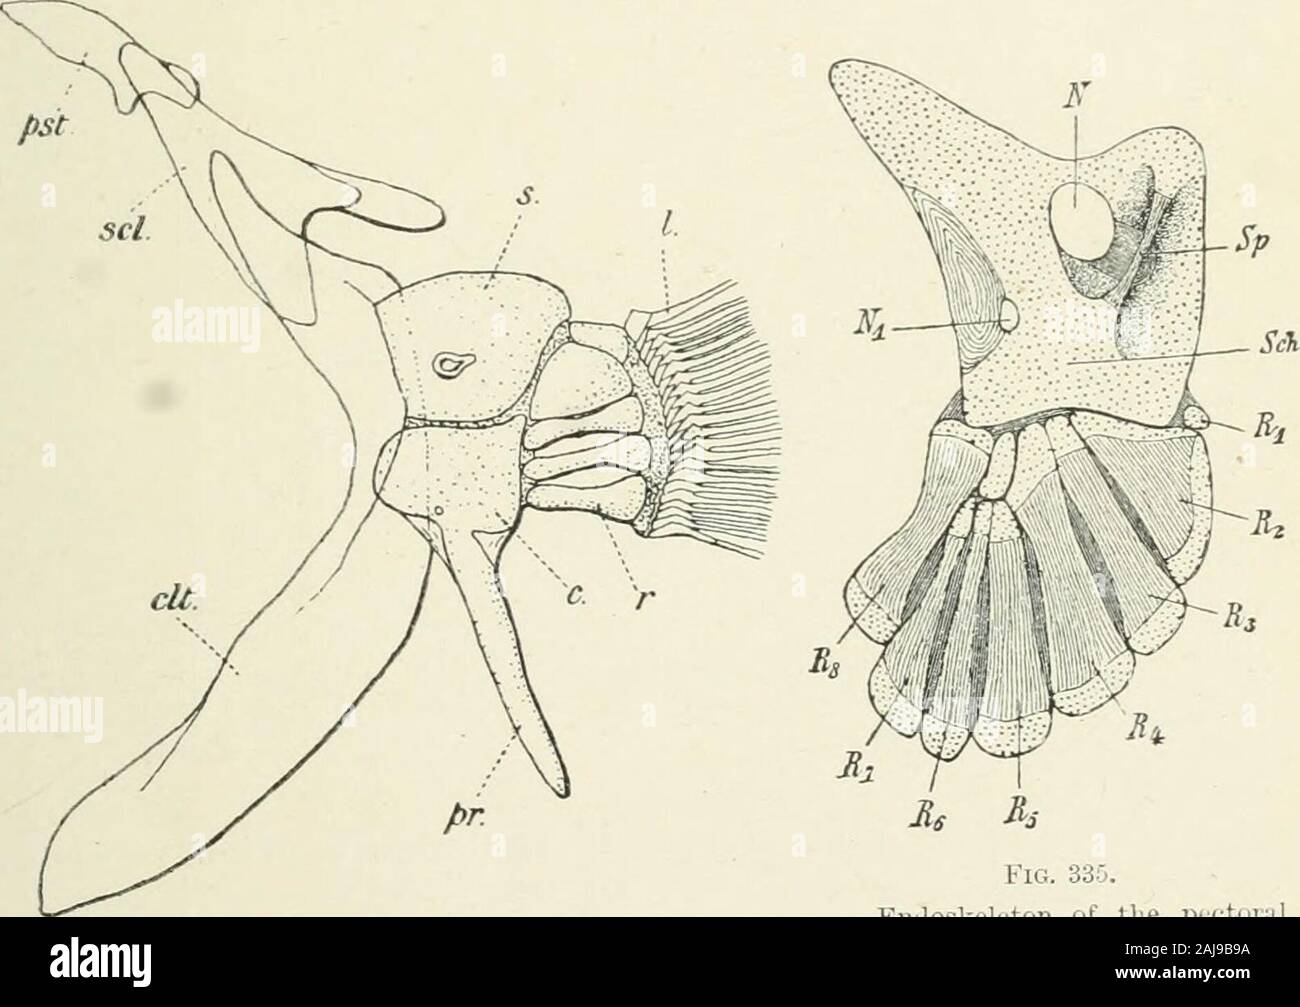 A treatise on zoology . Fig. 333.Head of Erythrichthys nitidus, Ricli., with mouth protracted. (After Giinthin.) embedded in the body-wall (Fig. 452). Almost always the radials ofthe pectoral fin are reduced to three or four short radii and one very. Fig. 334. Skeleton of the right half of pectoral girdle and righttill of Fierasfer acus, L. (After Emery.) c, coracoid ; clt,cleithrum ; I, lepidotvich ; pr, ventral process ; ps.t,post-temporal; r, 5th radial; s, scapula with smallforamen ; scl, supraclavicle. The cartilage is dotted. Fig. 335.Endoskeleton of the pictoralt;ii-dle and tin of Malap Stock Photo